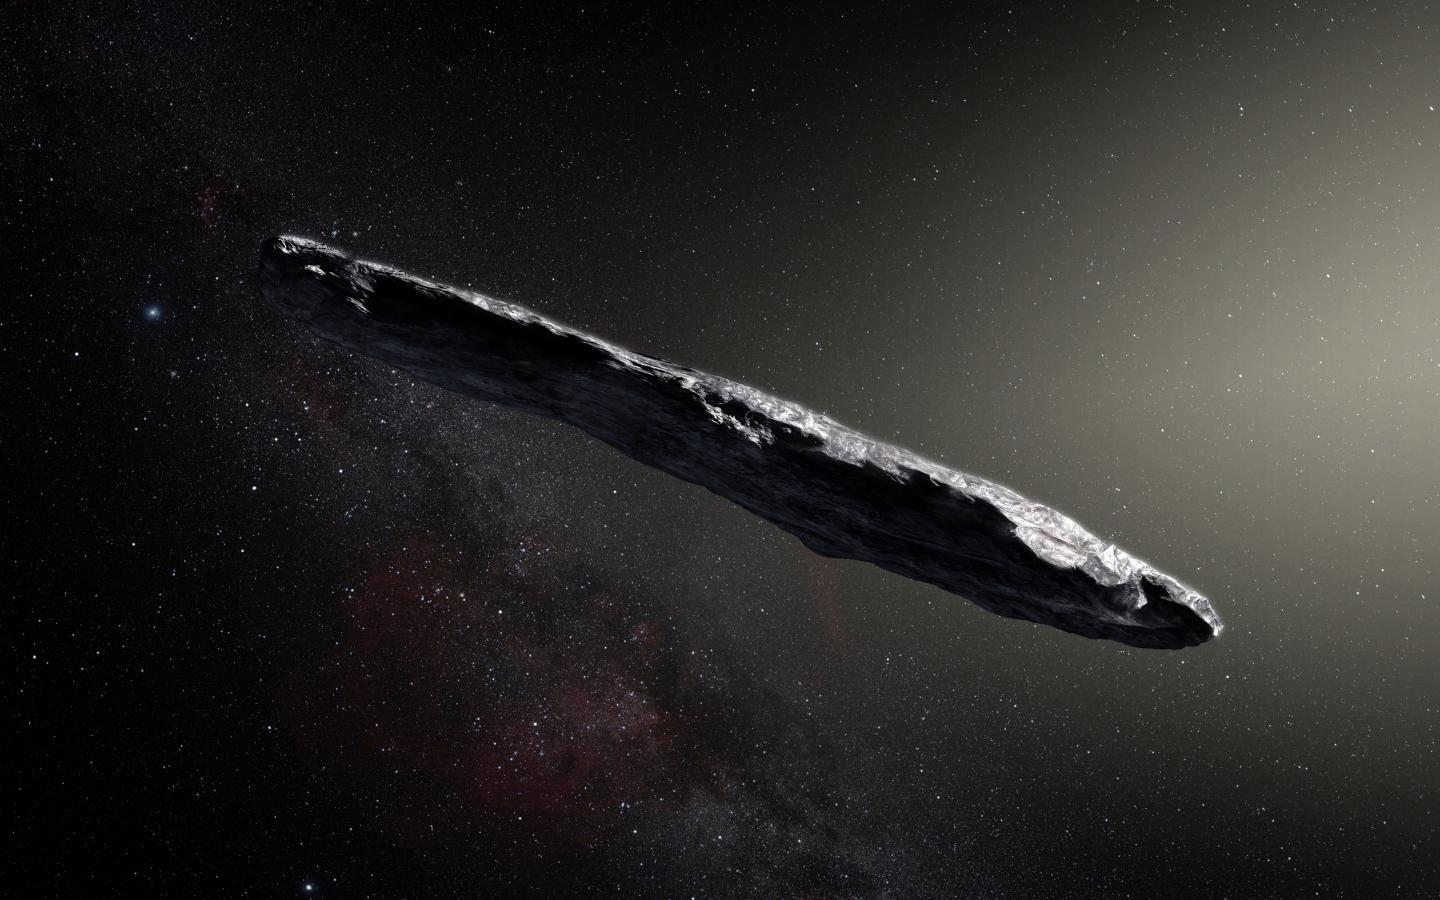 Image of the asteroid Oumuamua